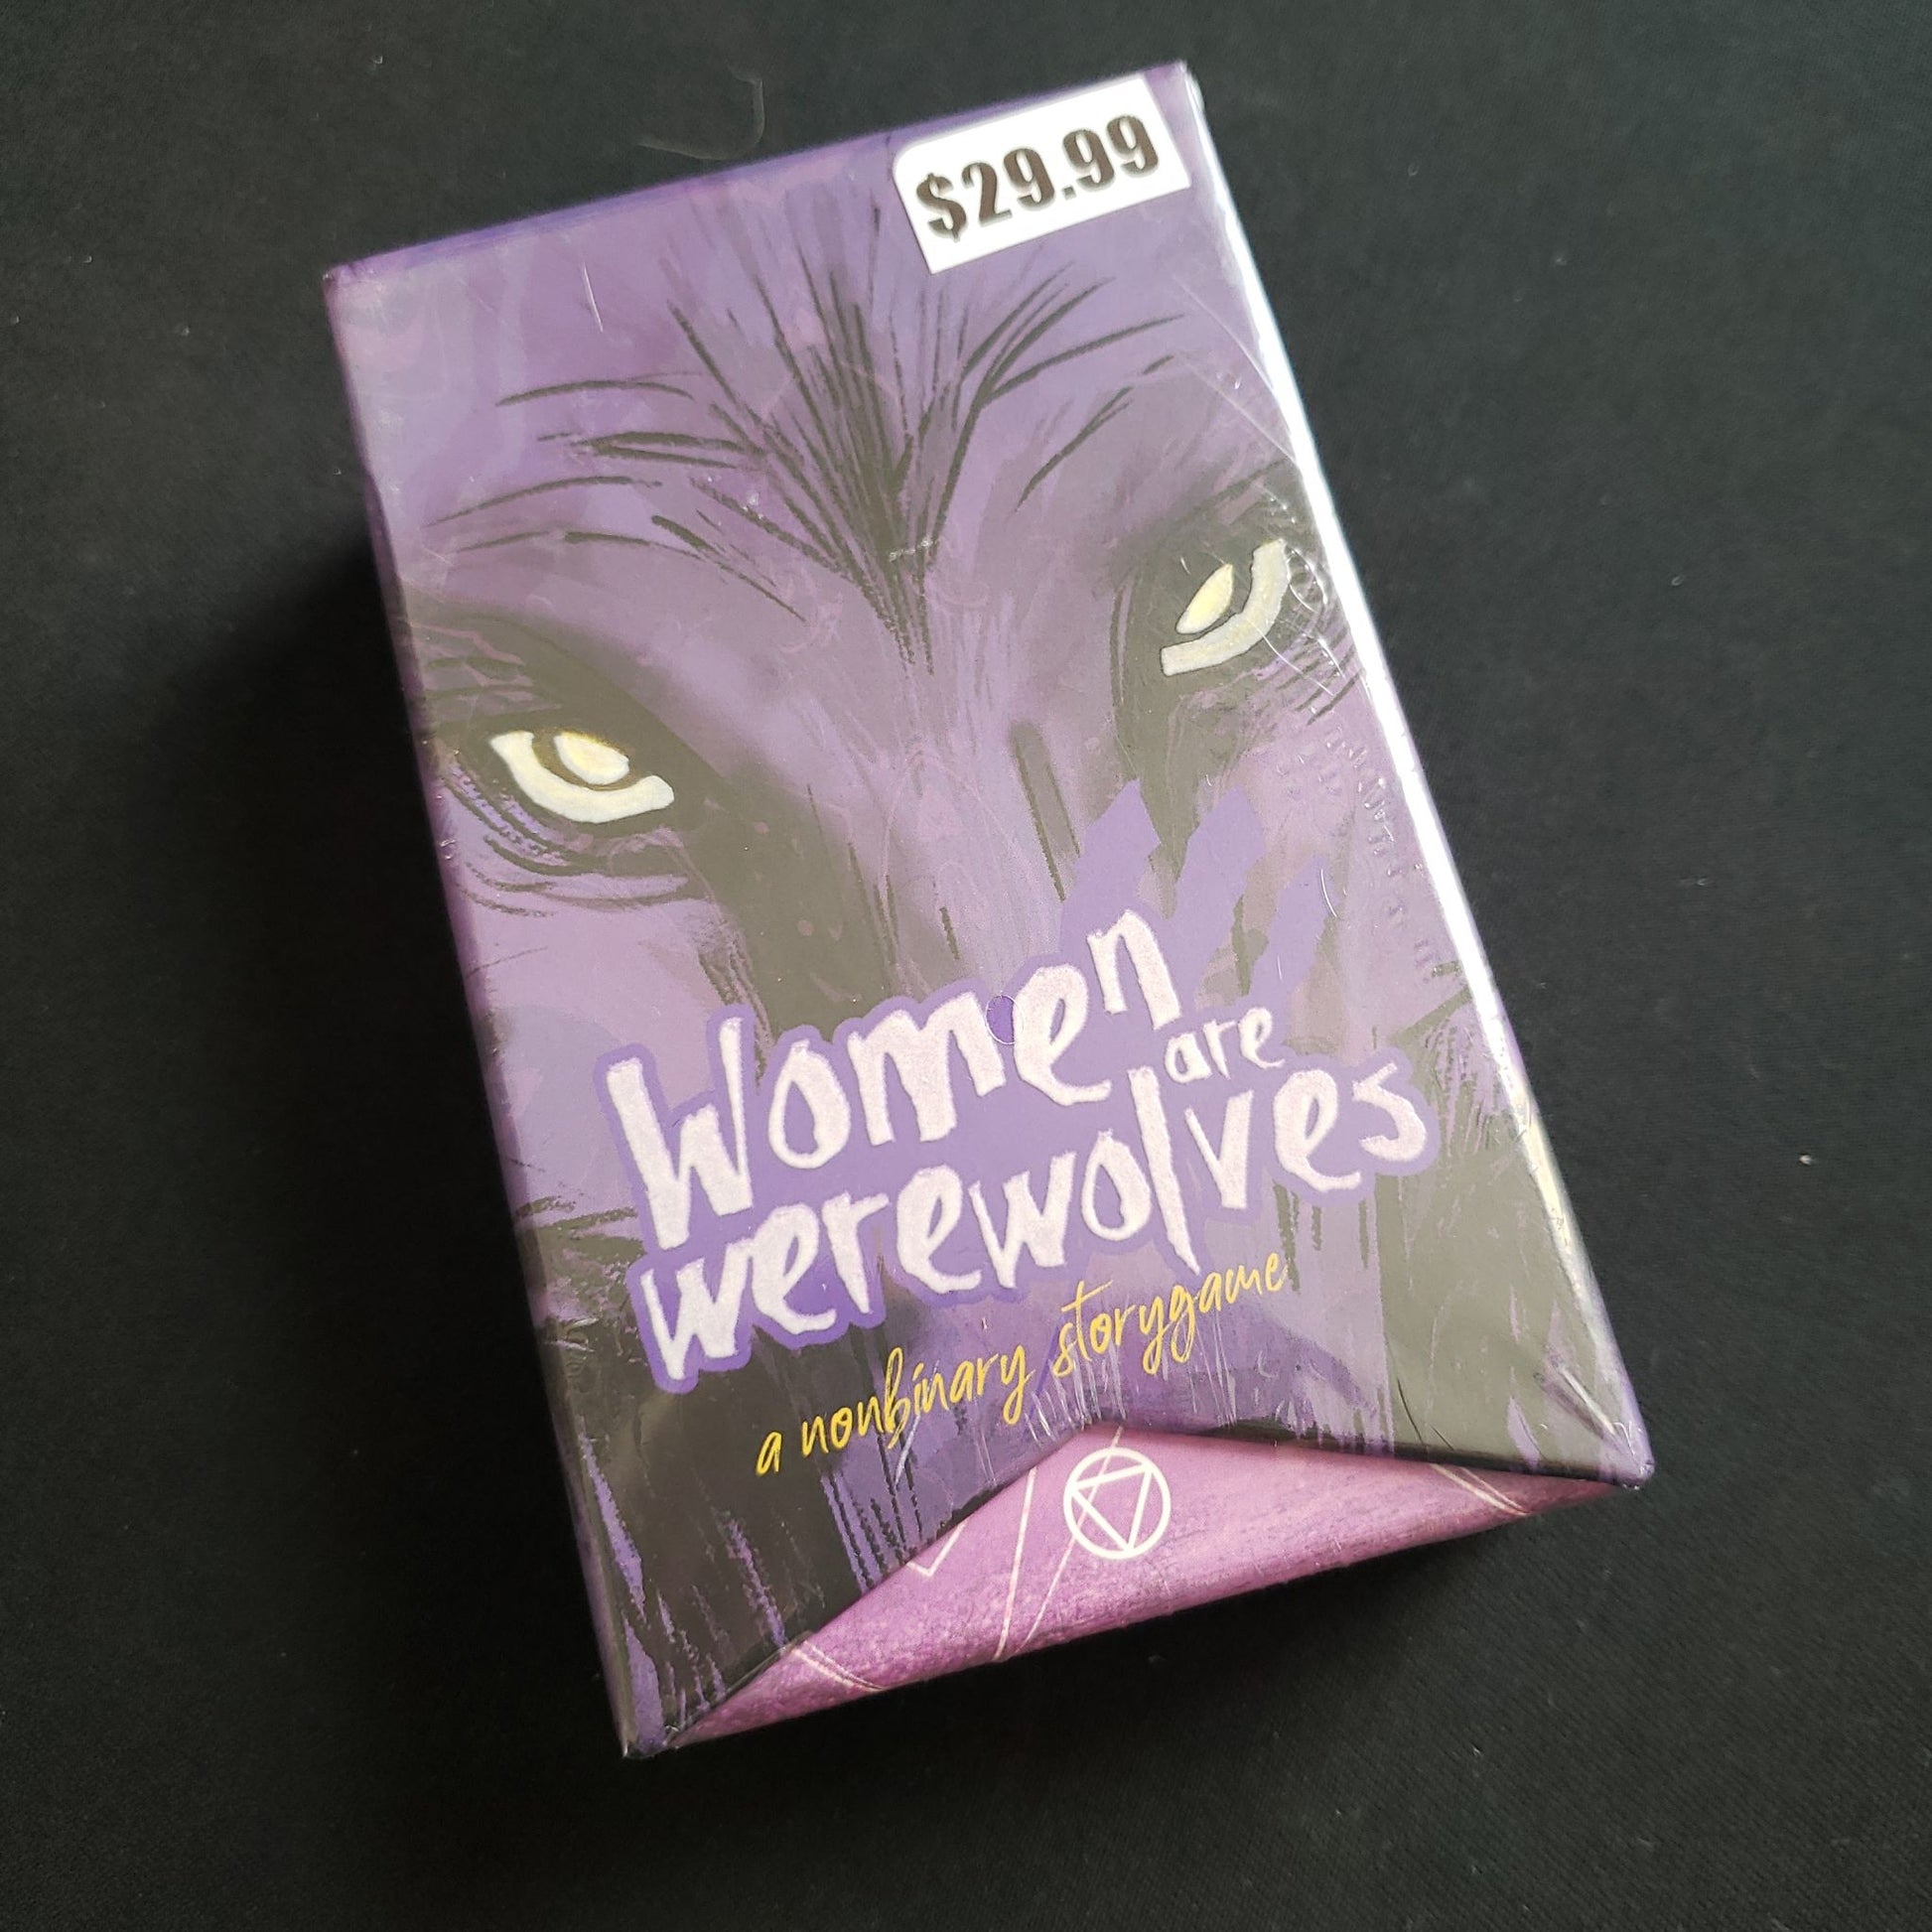 Women Are Werewolves roleplaying game - front cover of box